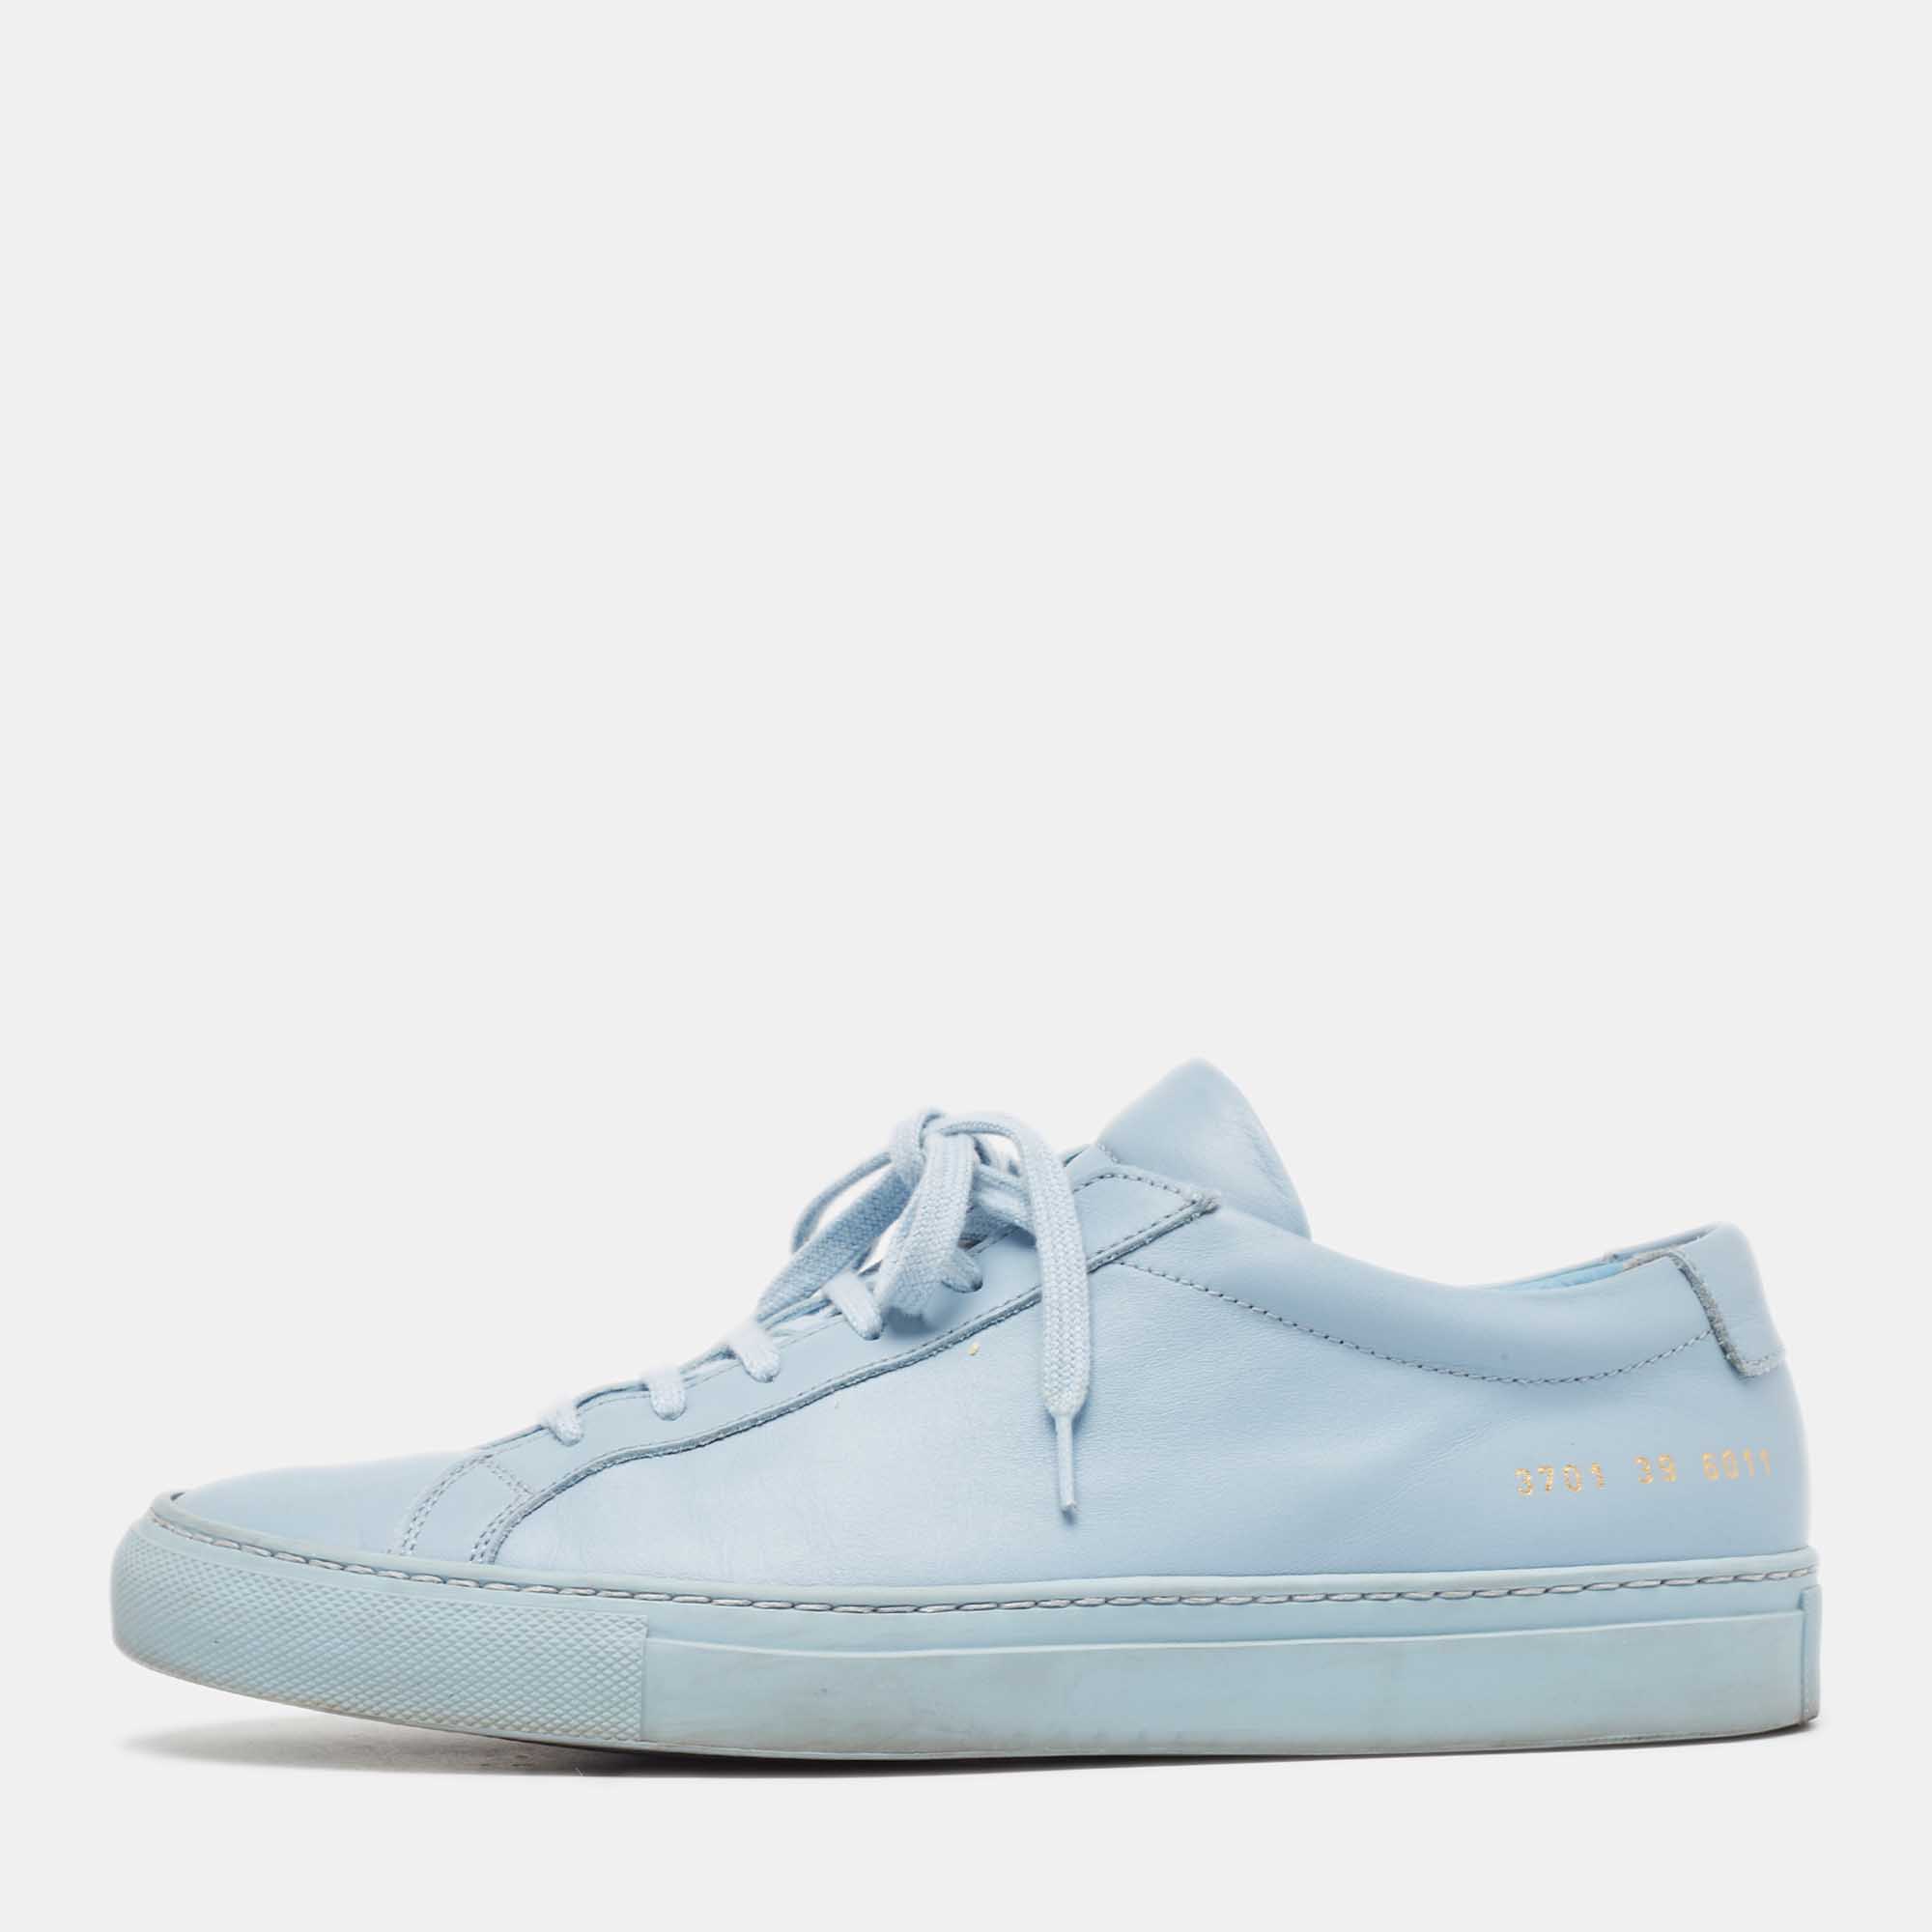 Common Projects Blue Leather Low Top Sneakers Size 39